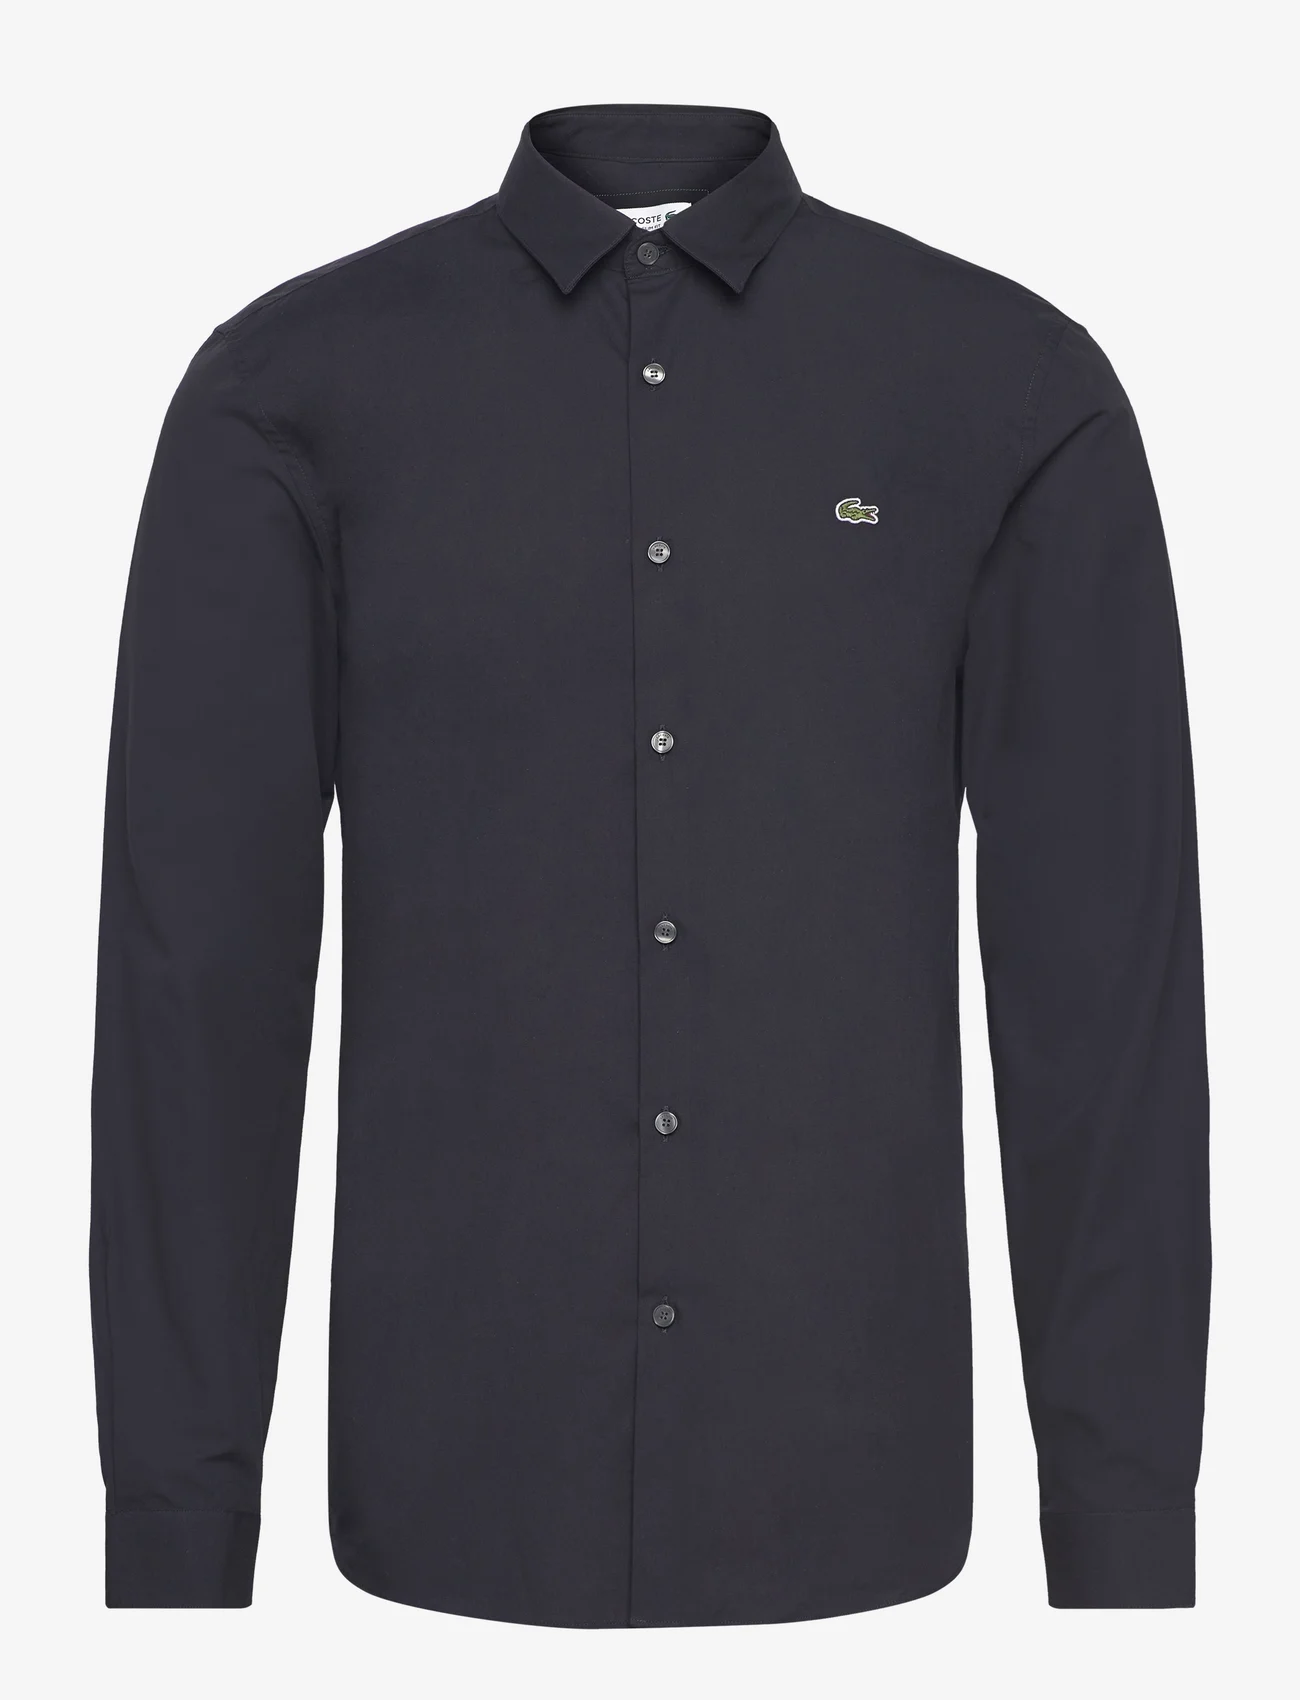 Lacoste - WOVEN SHIRTS - casual skjorter - abysm - 0